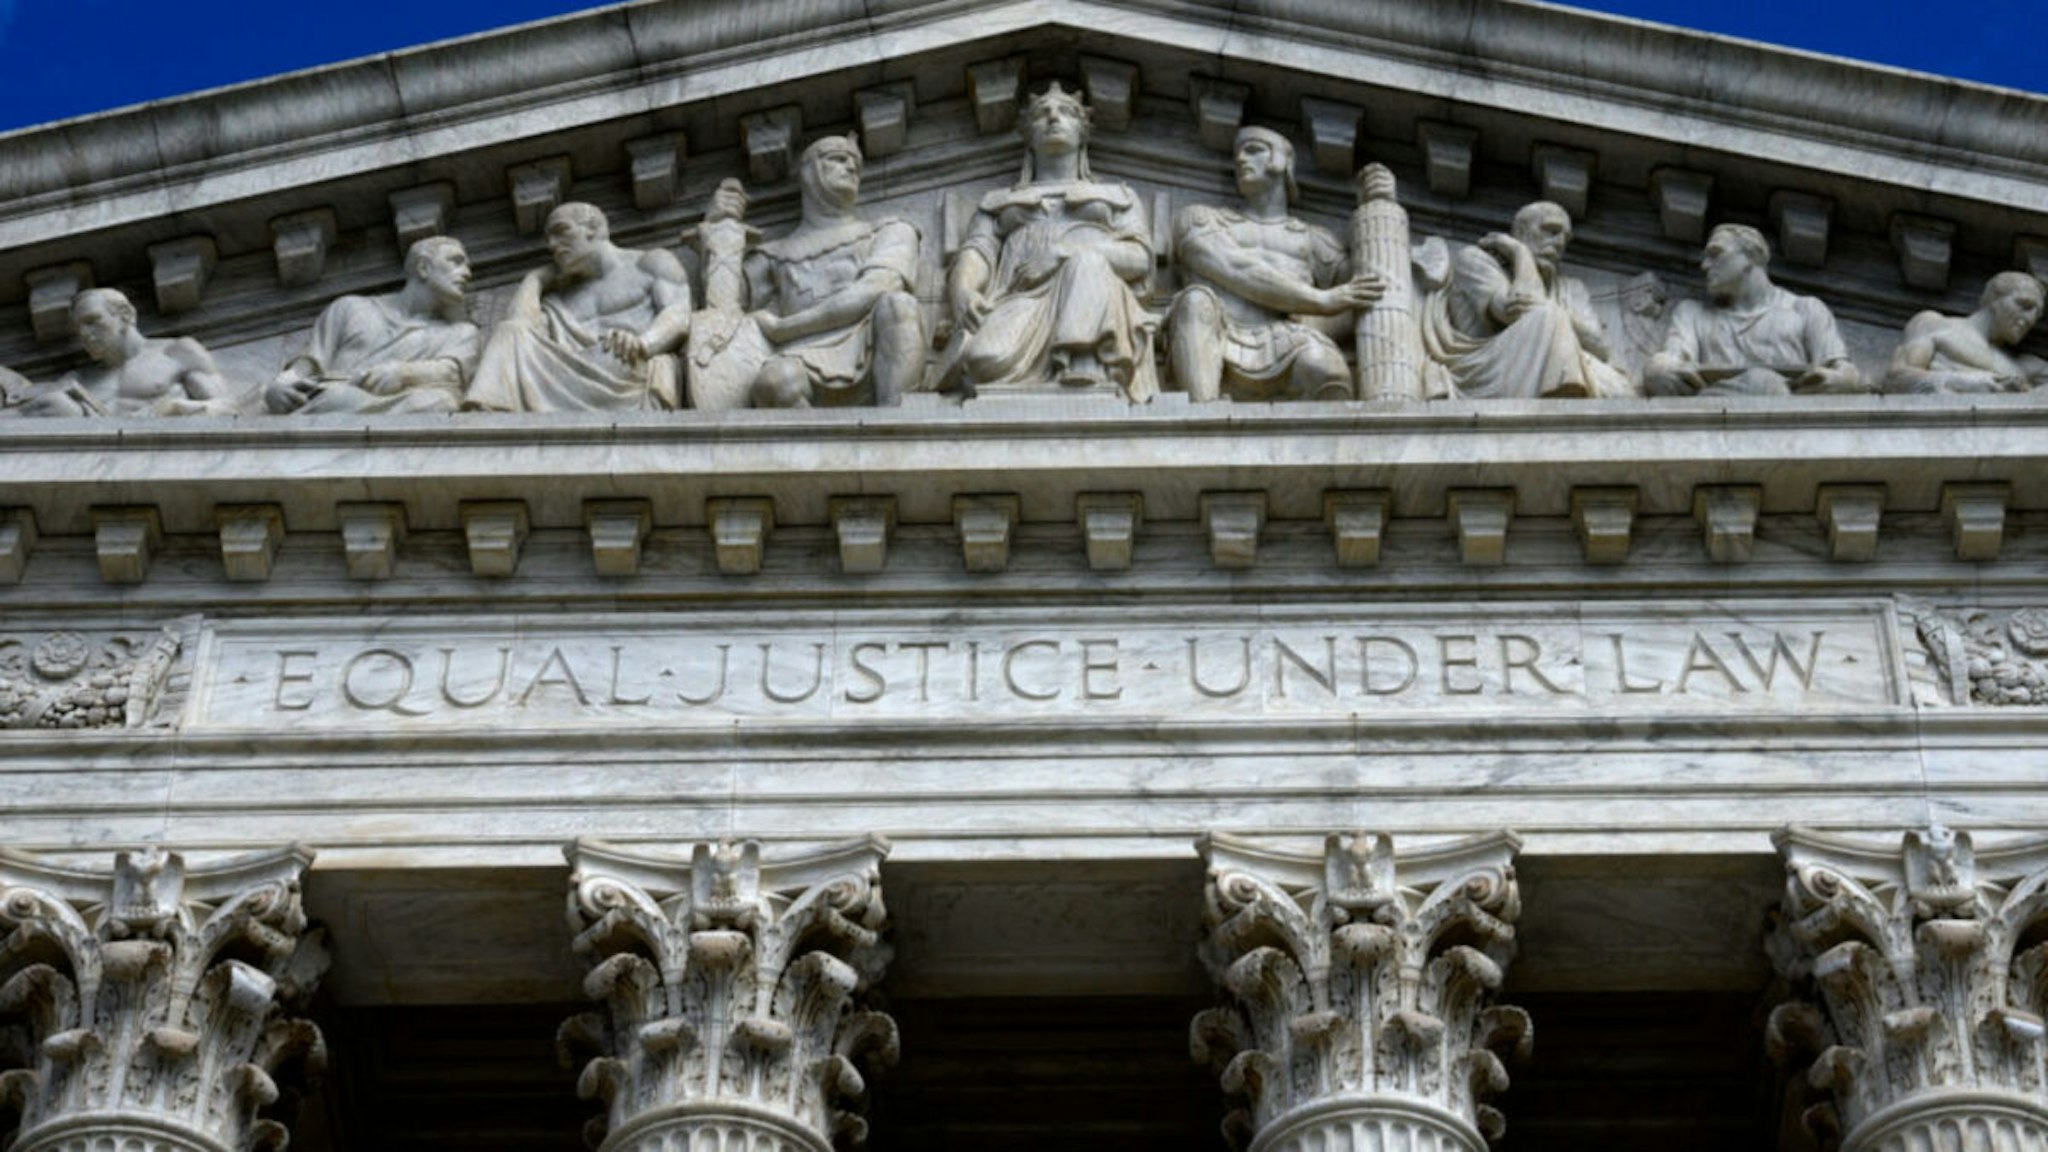 The U.S. Supreme Court Building in Washington, D.C., is the seat of the Supreme Court of the United States and the Judicial Branch of government.